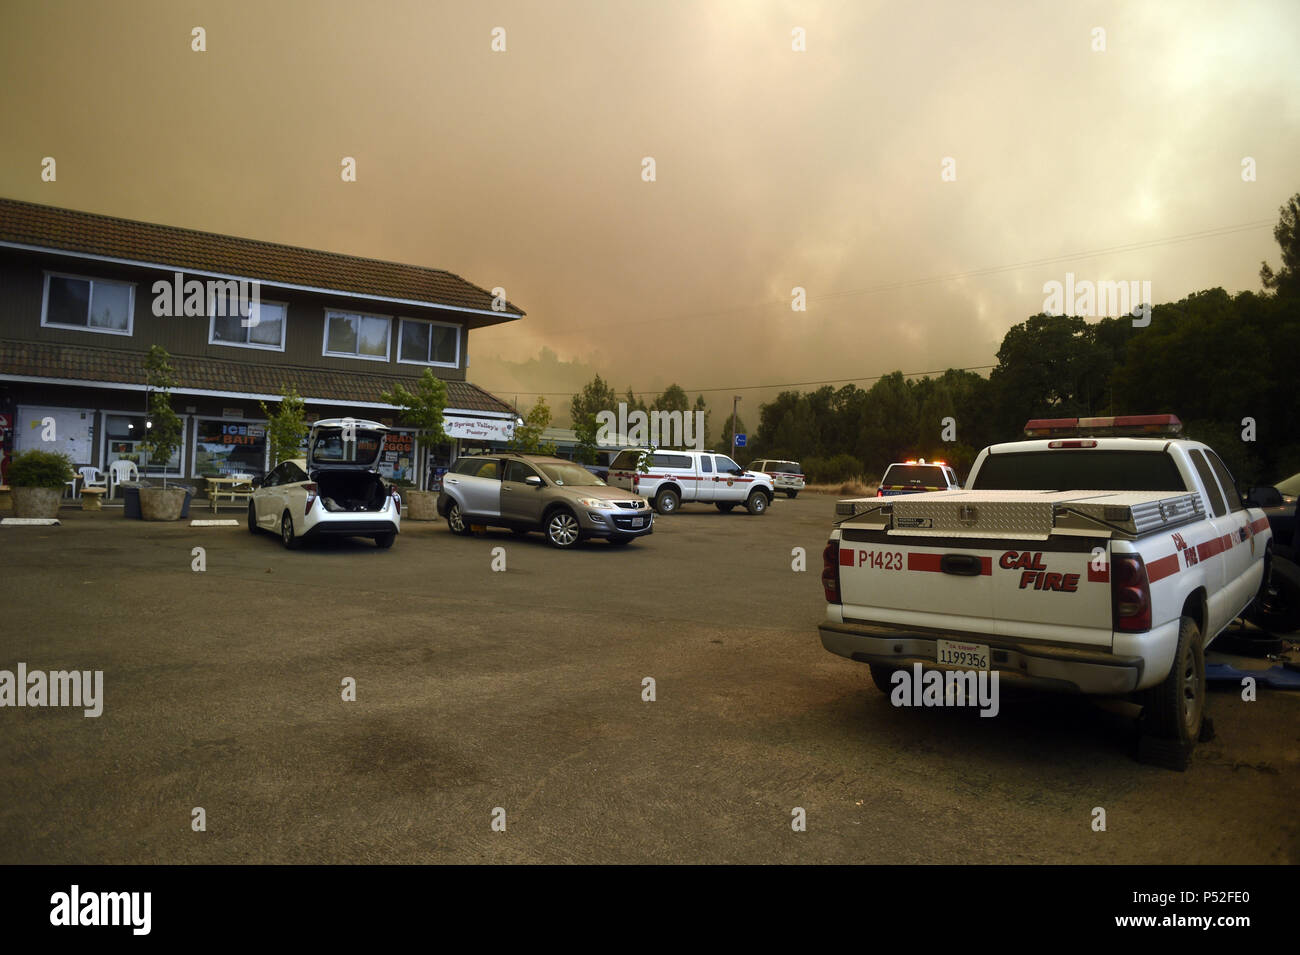 Clearlake Oaks, California, USA. 24th June, 2018. The Pawnee Fire in Lake County continued to show aggressive fire behavior in the early afternoon of Sunday. Fire crews focused on structure protection while helicopters make water drops to assist the strike teams on the ground. Credit: Neal Waters/ZUMA Wire/Alamy Live News Stock Photo